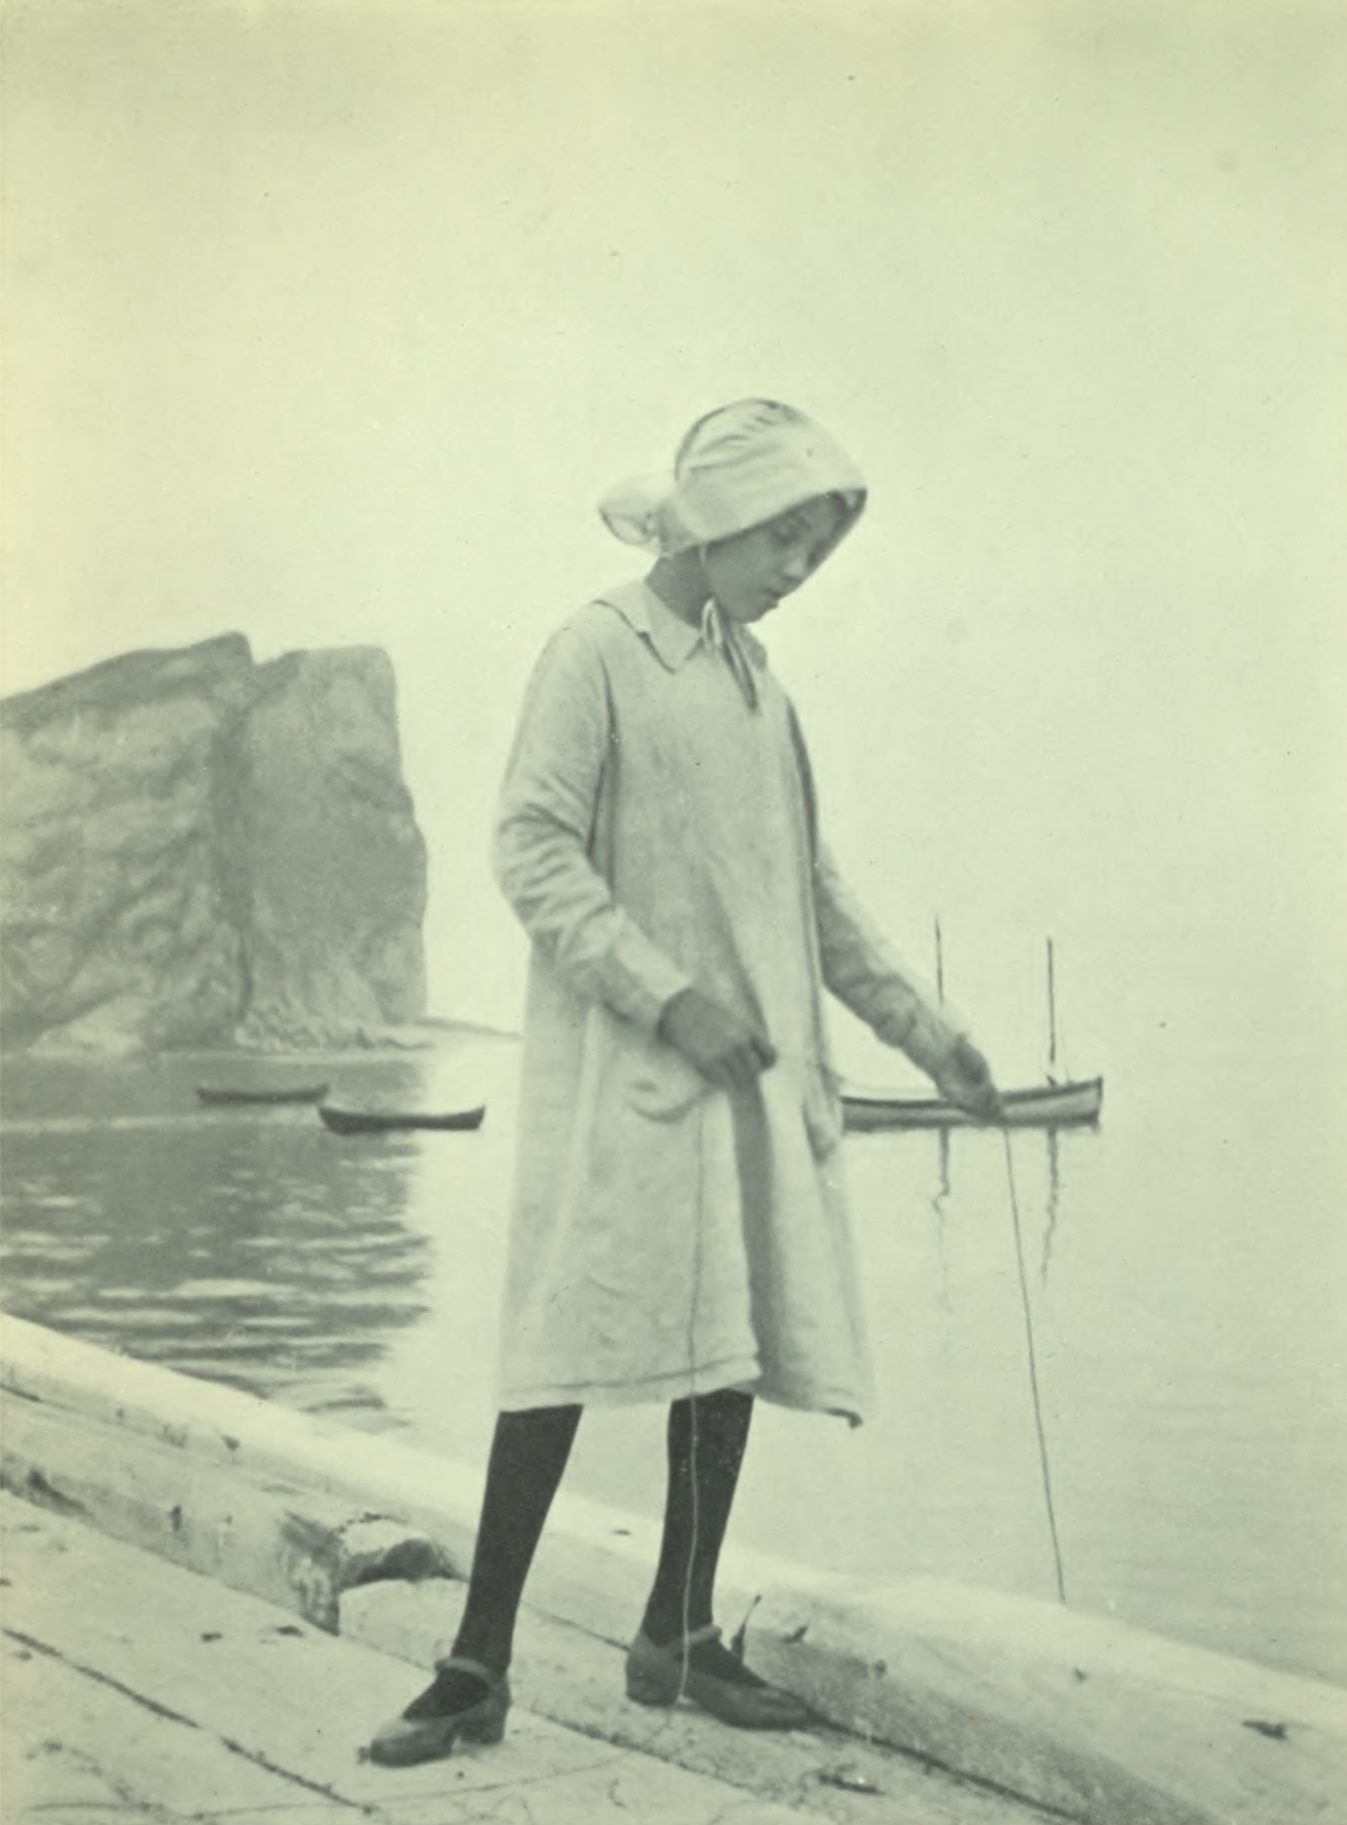 Girl fishing from a wooden platform.